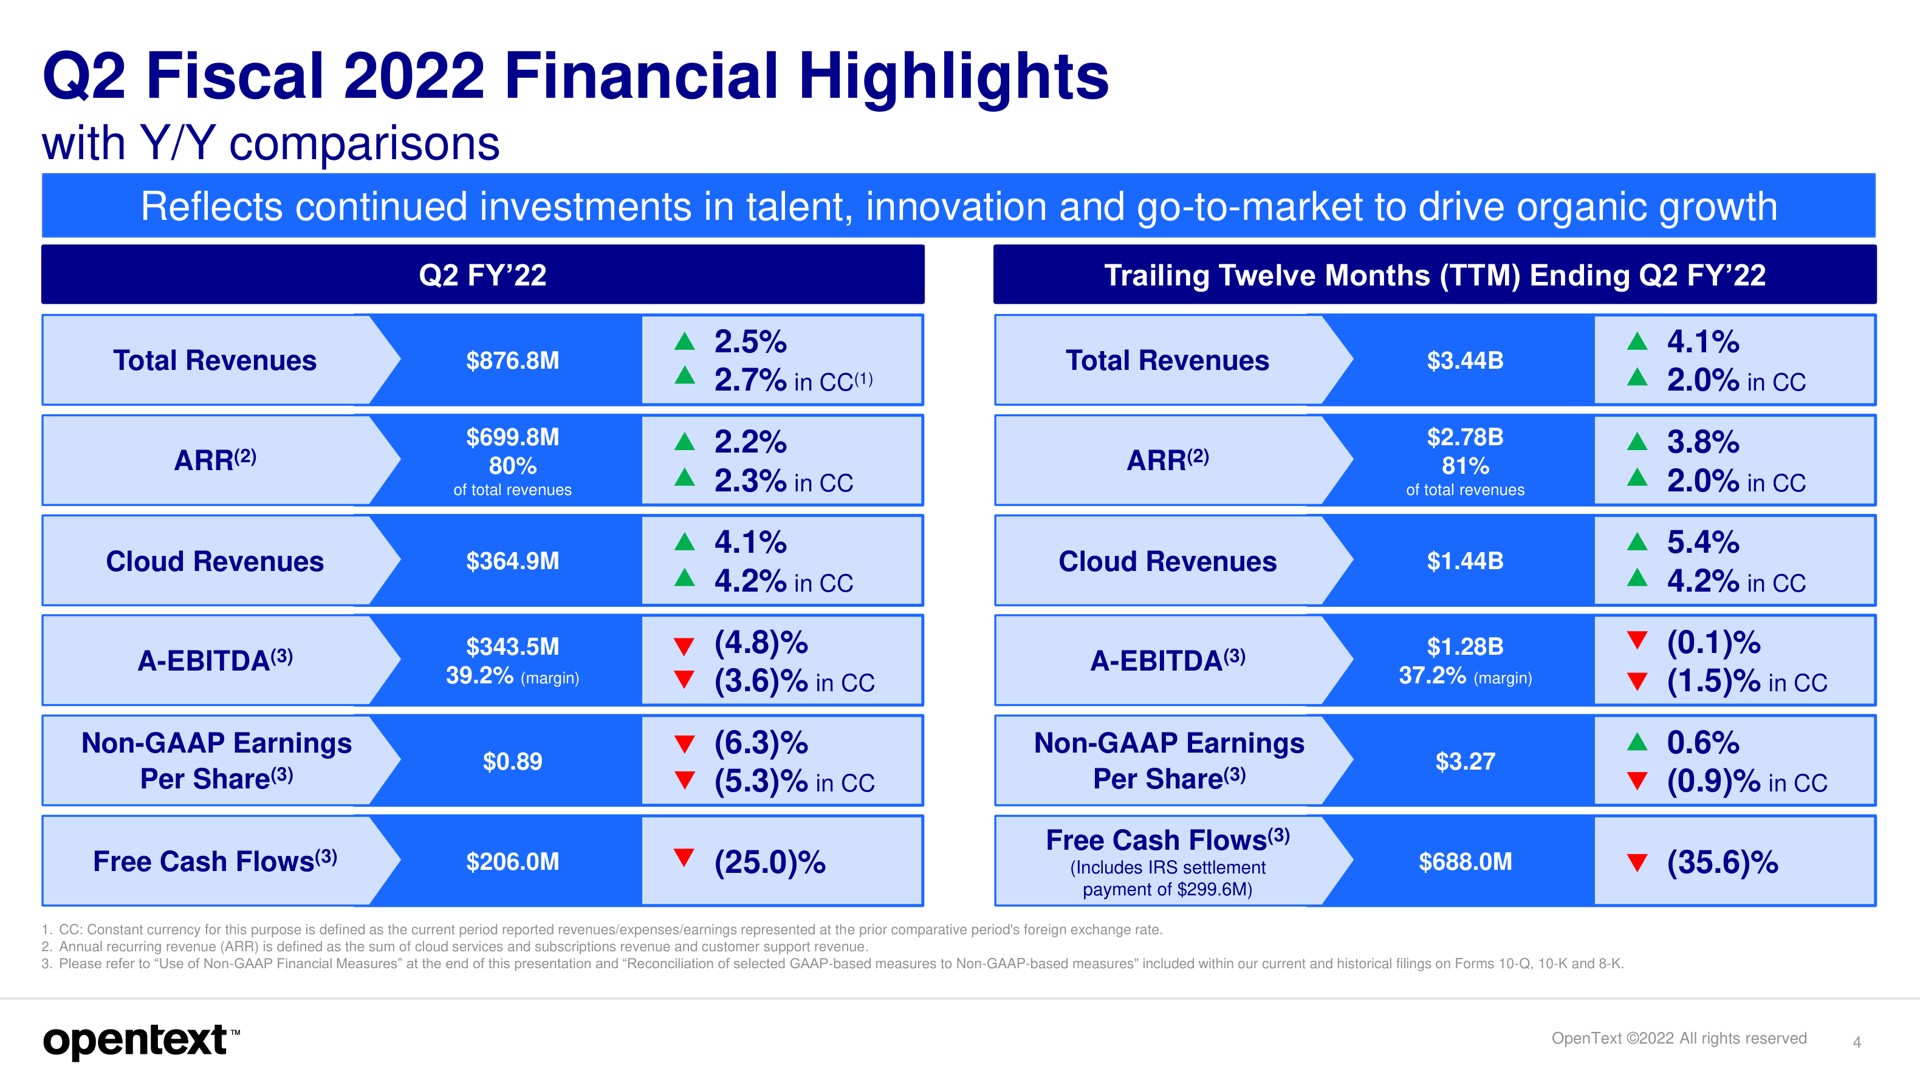 fiscal financial highlights with comparisons reflects continued investments in talent innovation and go to market to drive organic growth | OpenText